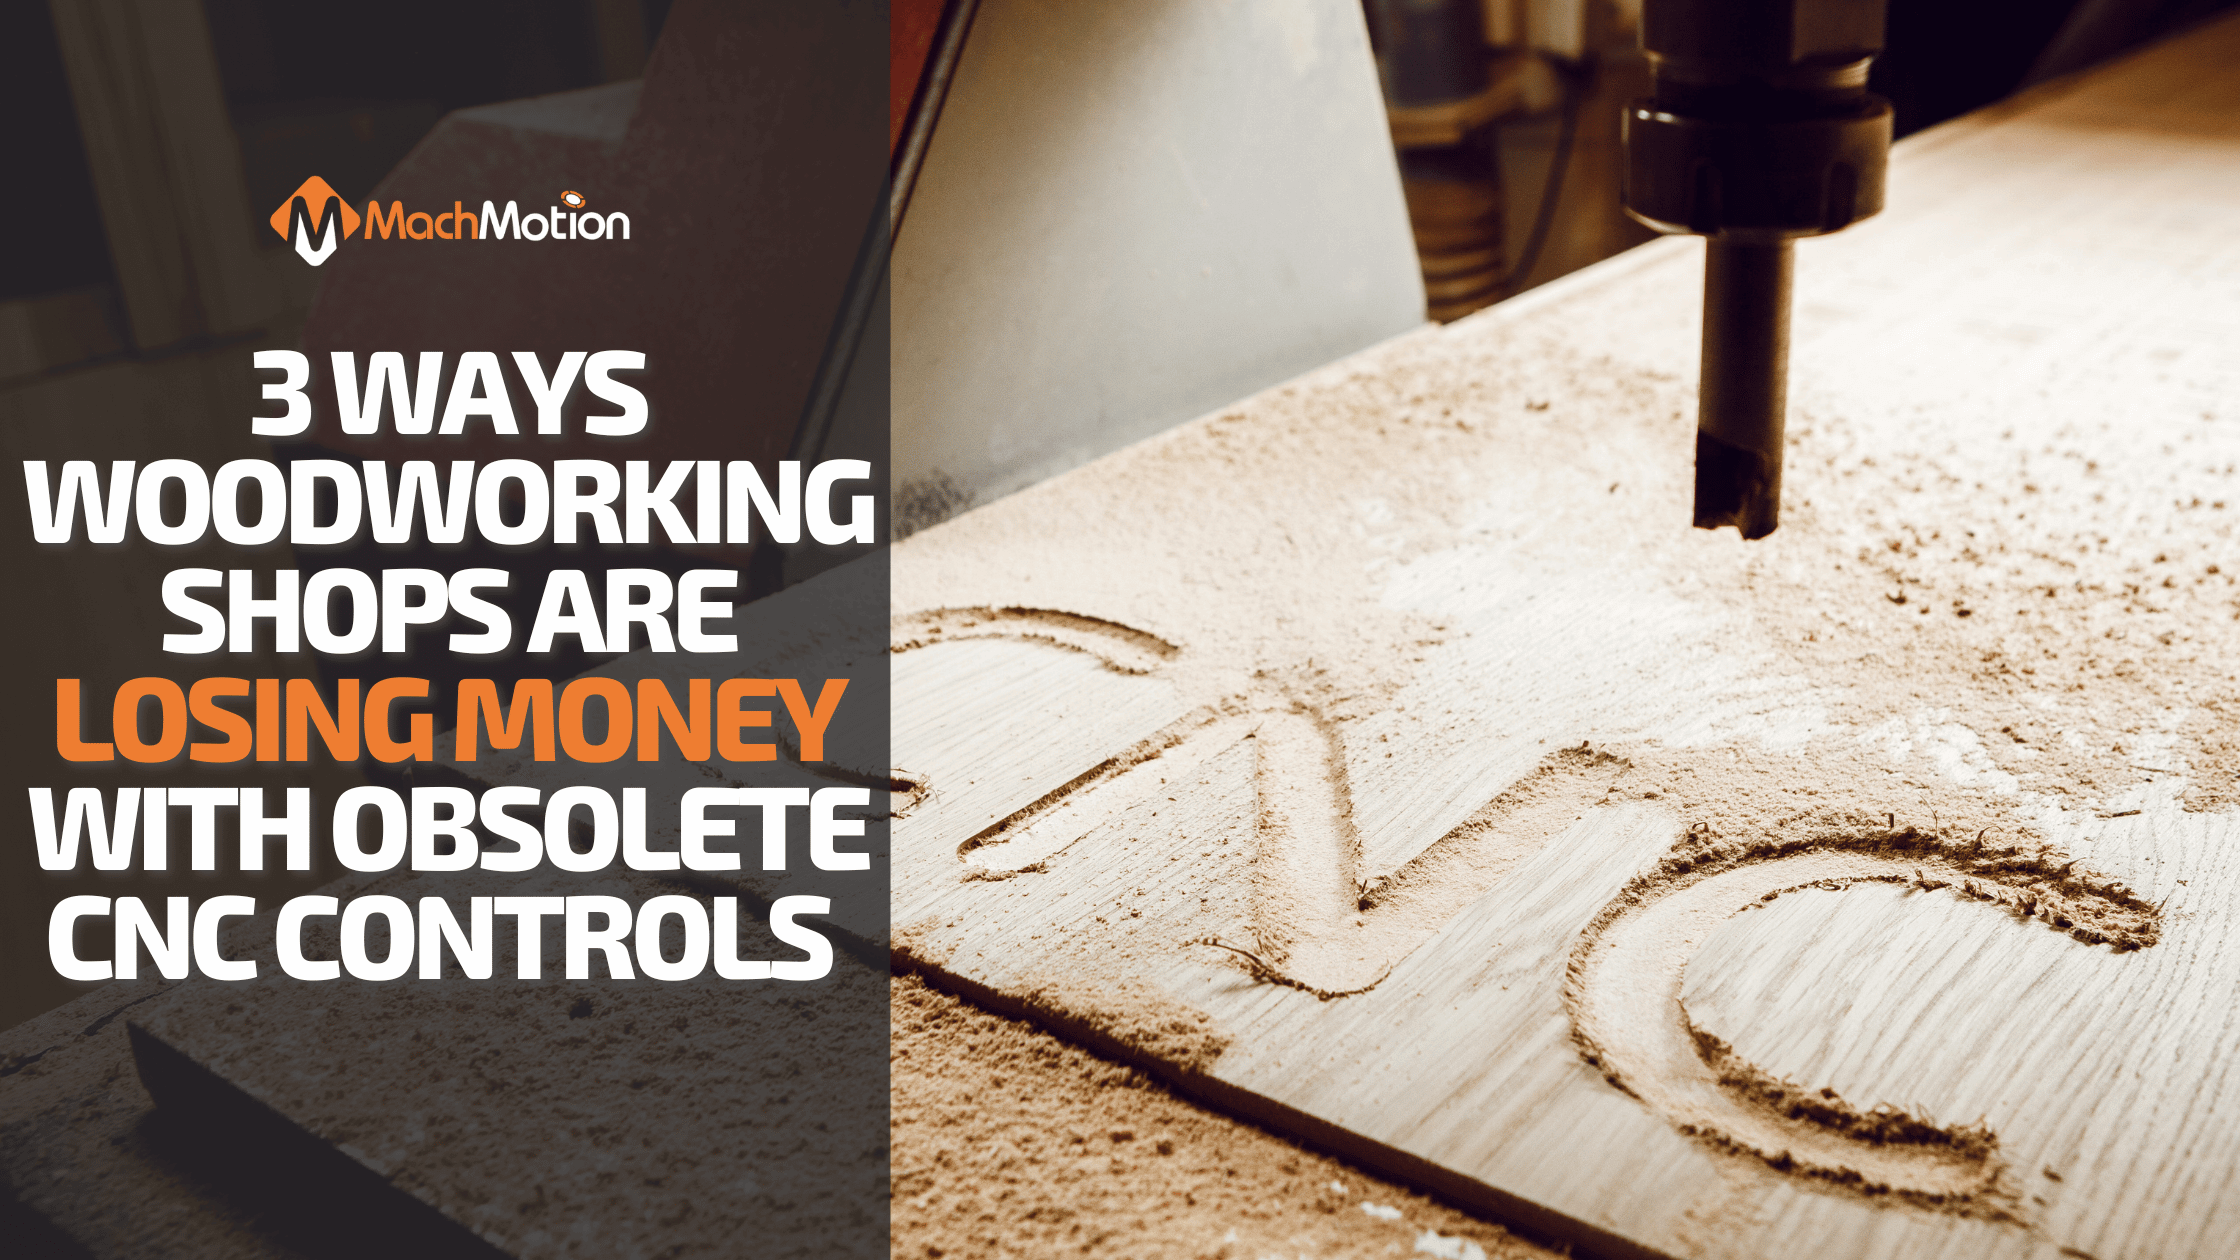 3 Ways Woodworking Shops Are Losing Money From Obsolete CNC Machinery